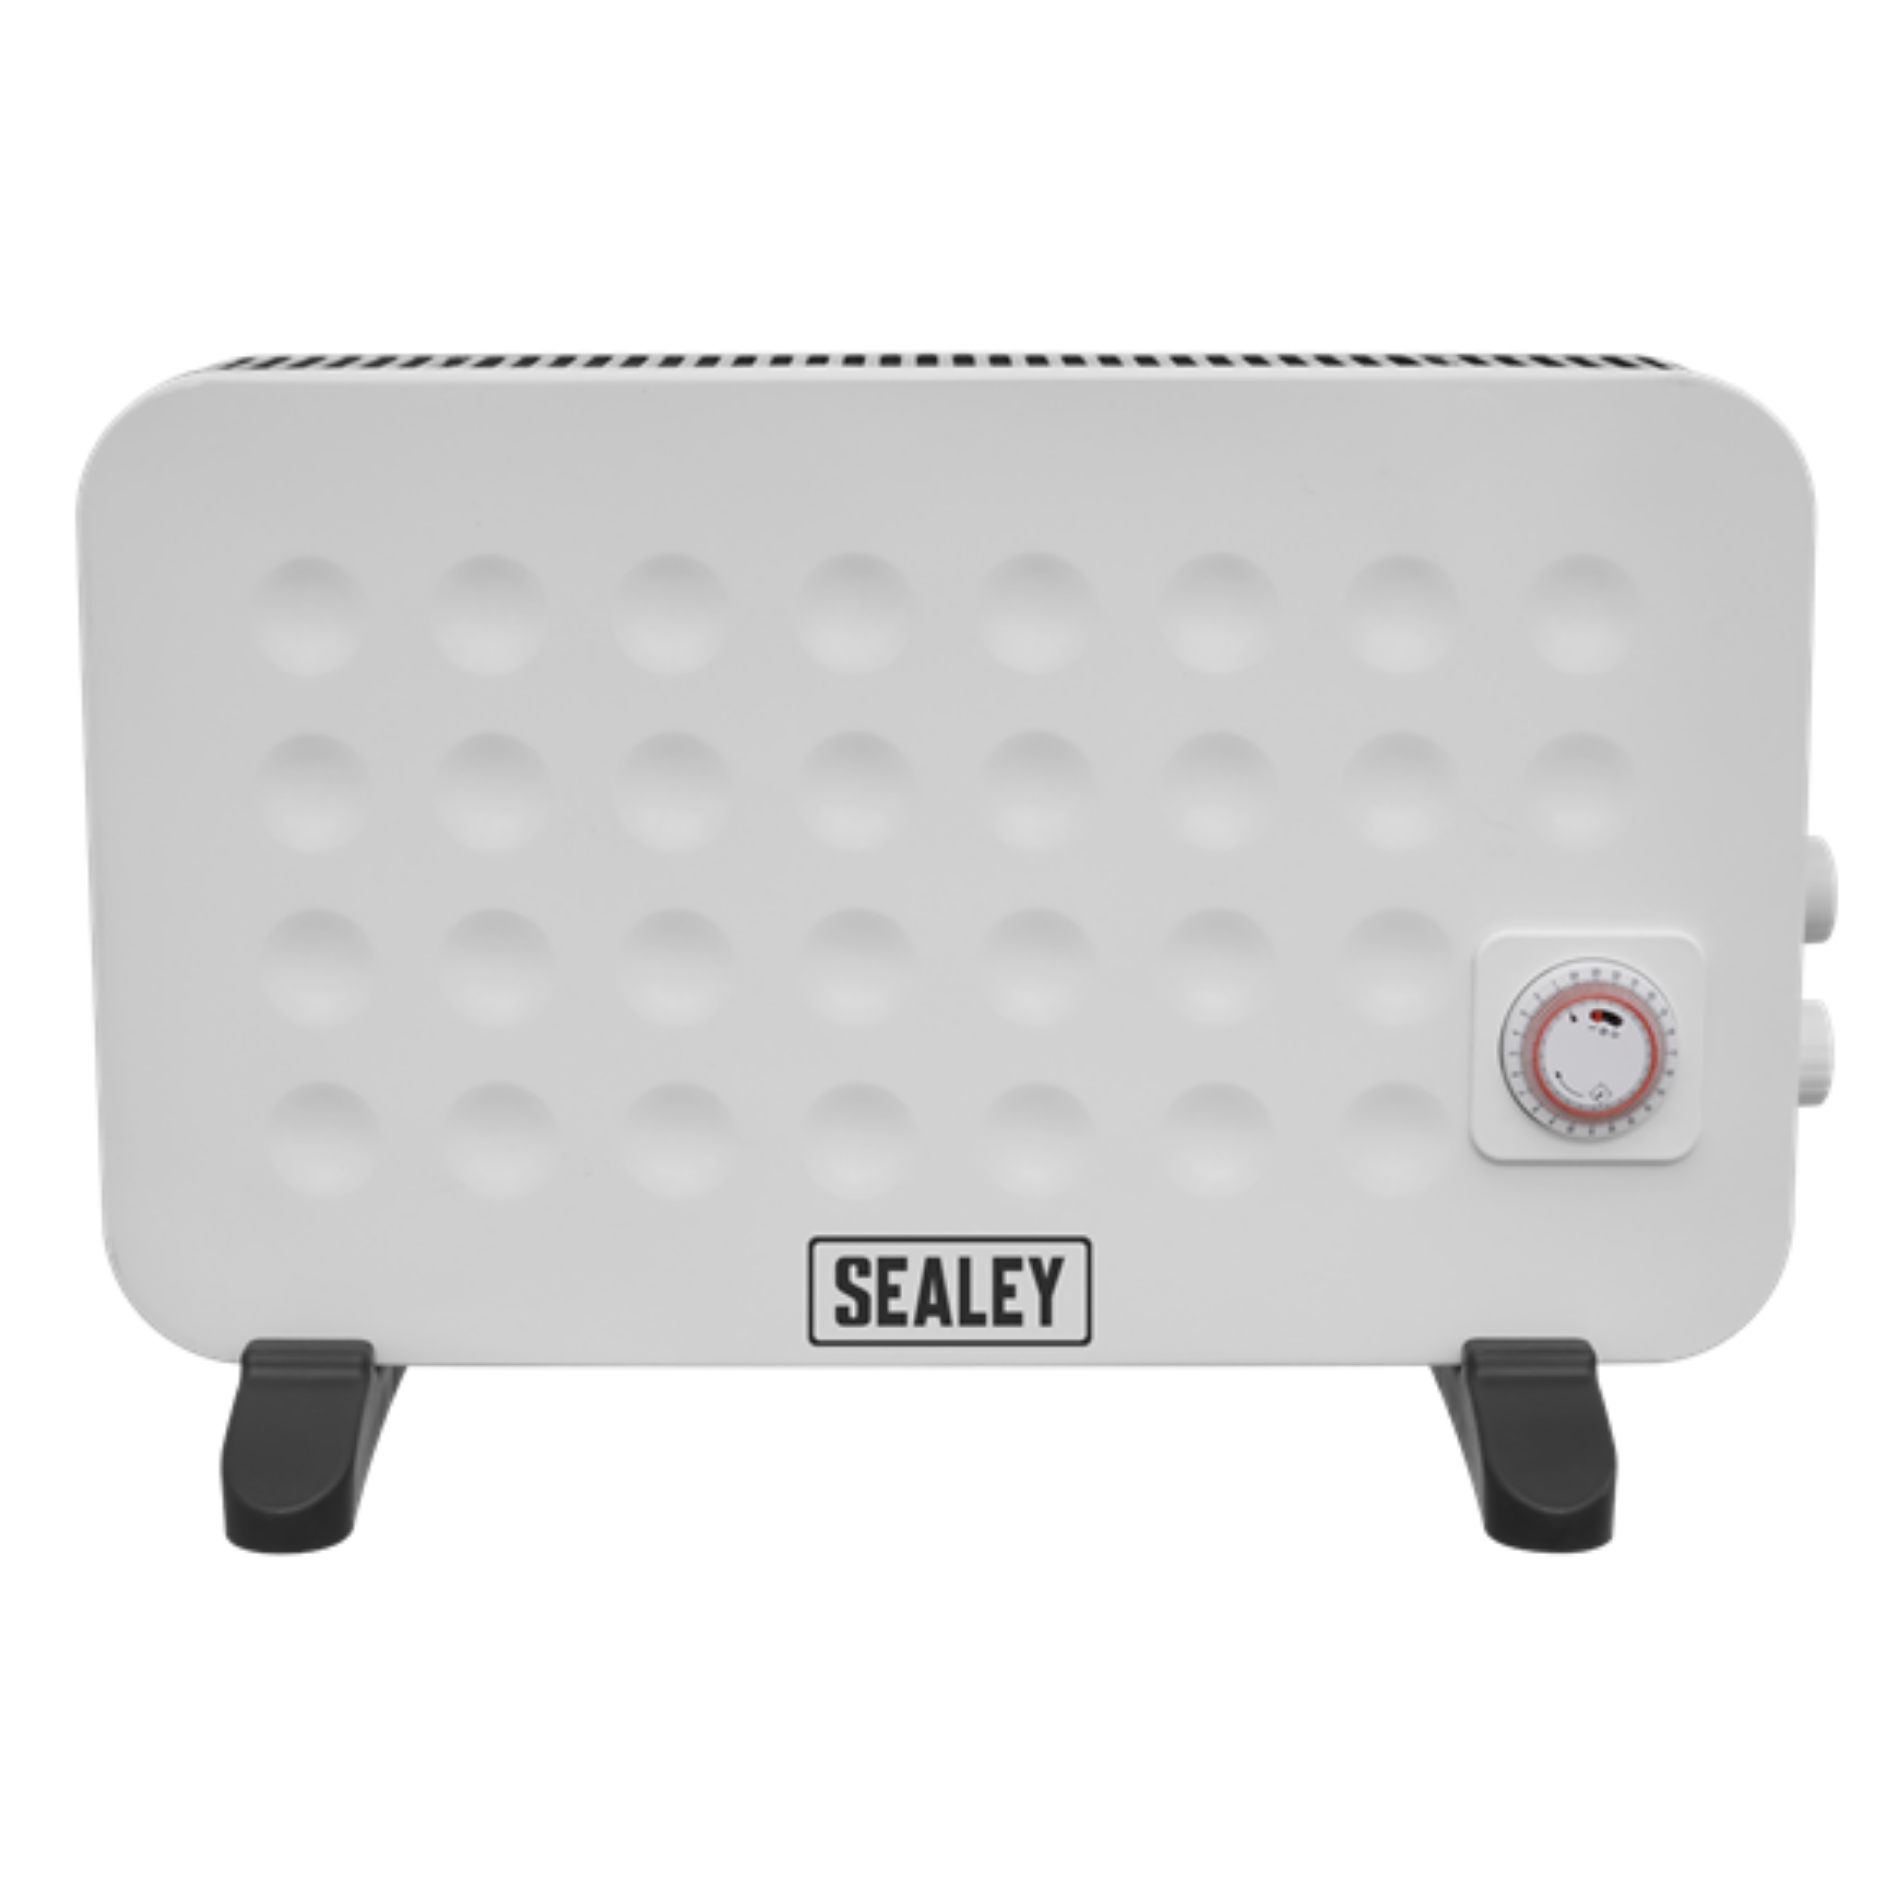 Sealey CD2013TT 2kW Convector Heater with Turbo & Timer